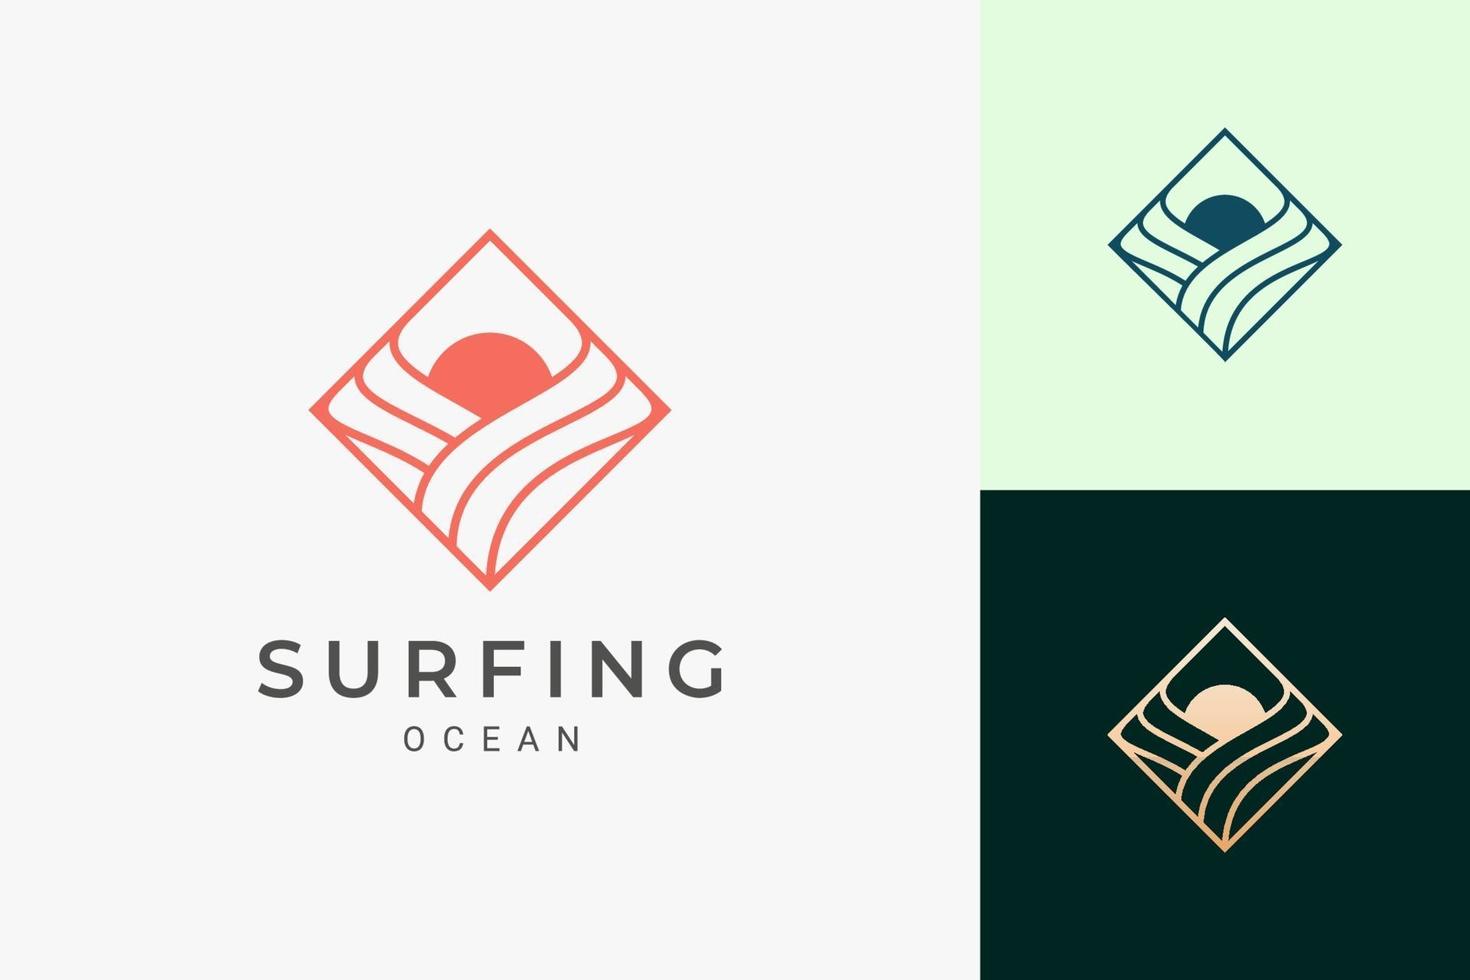 Ocean or surf logo in simple rhombus with wave and sun shape vector